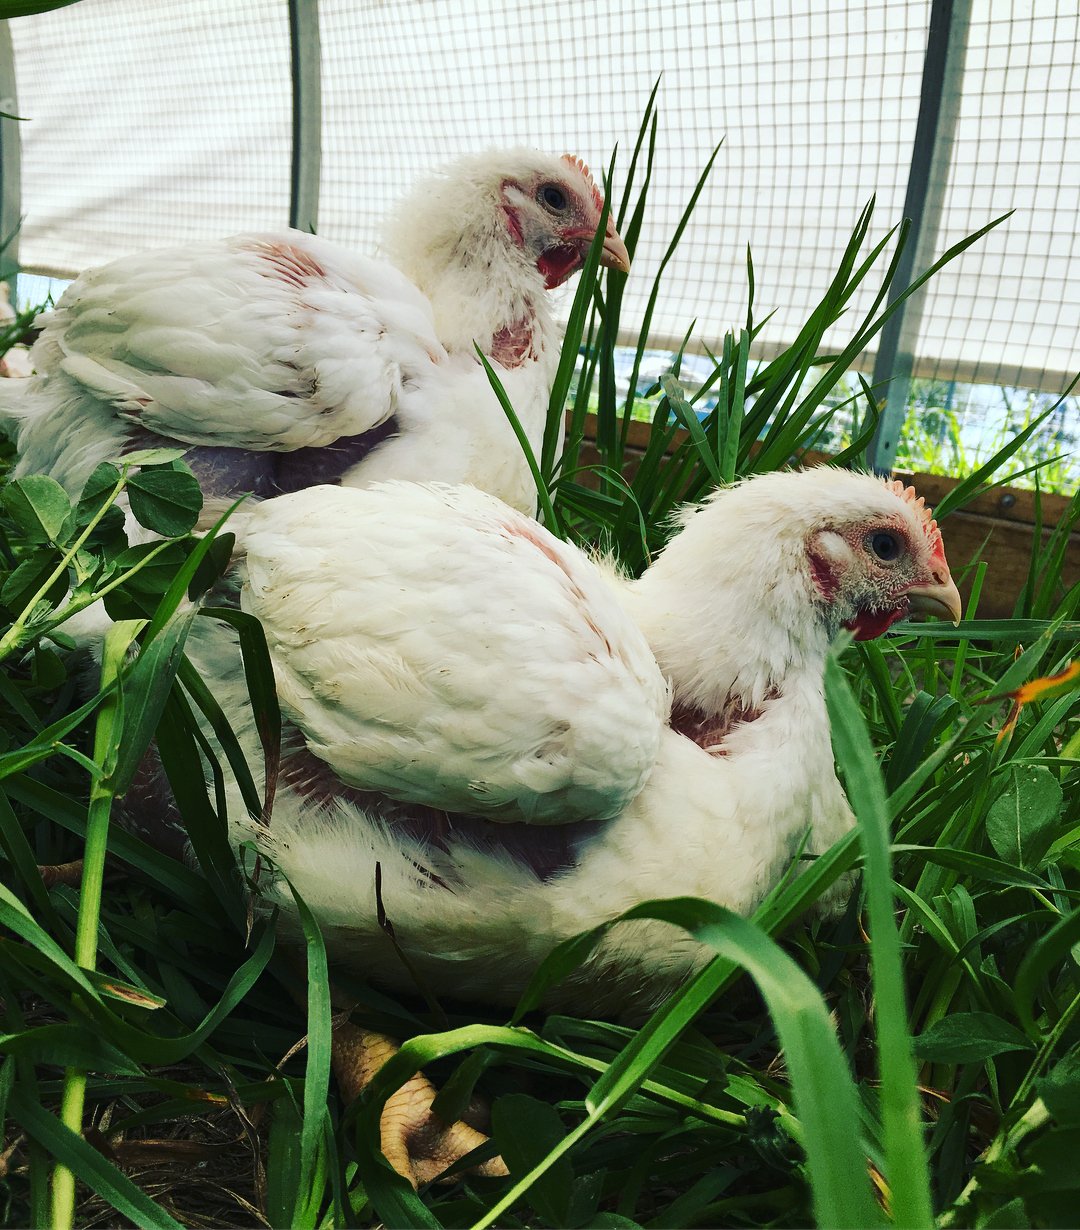 Previous Happening: Farm Happenings for June 28, 2018 Chicken Share